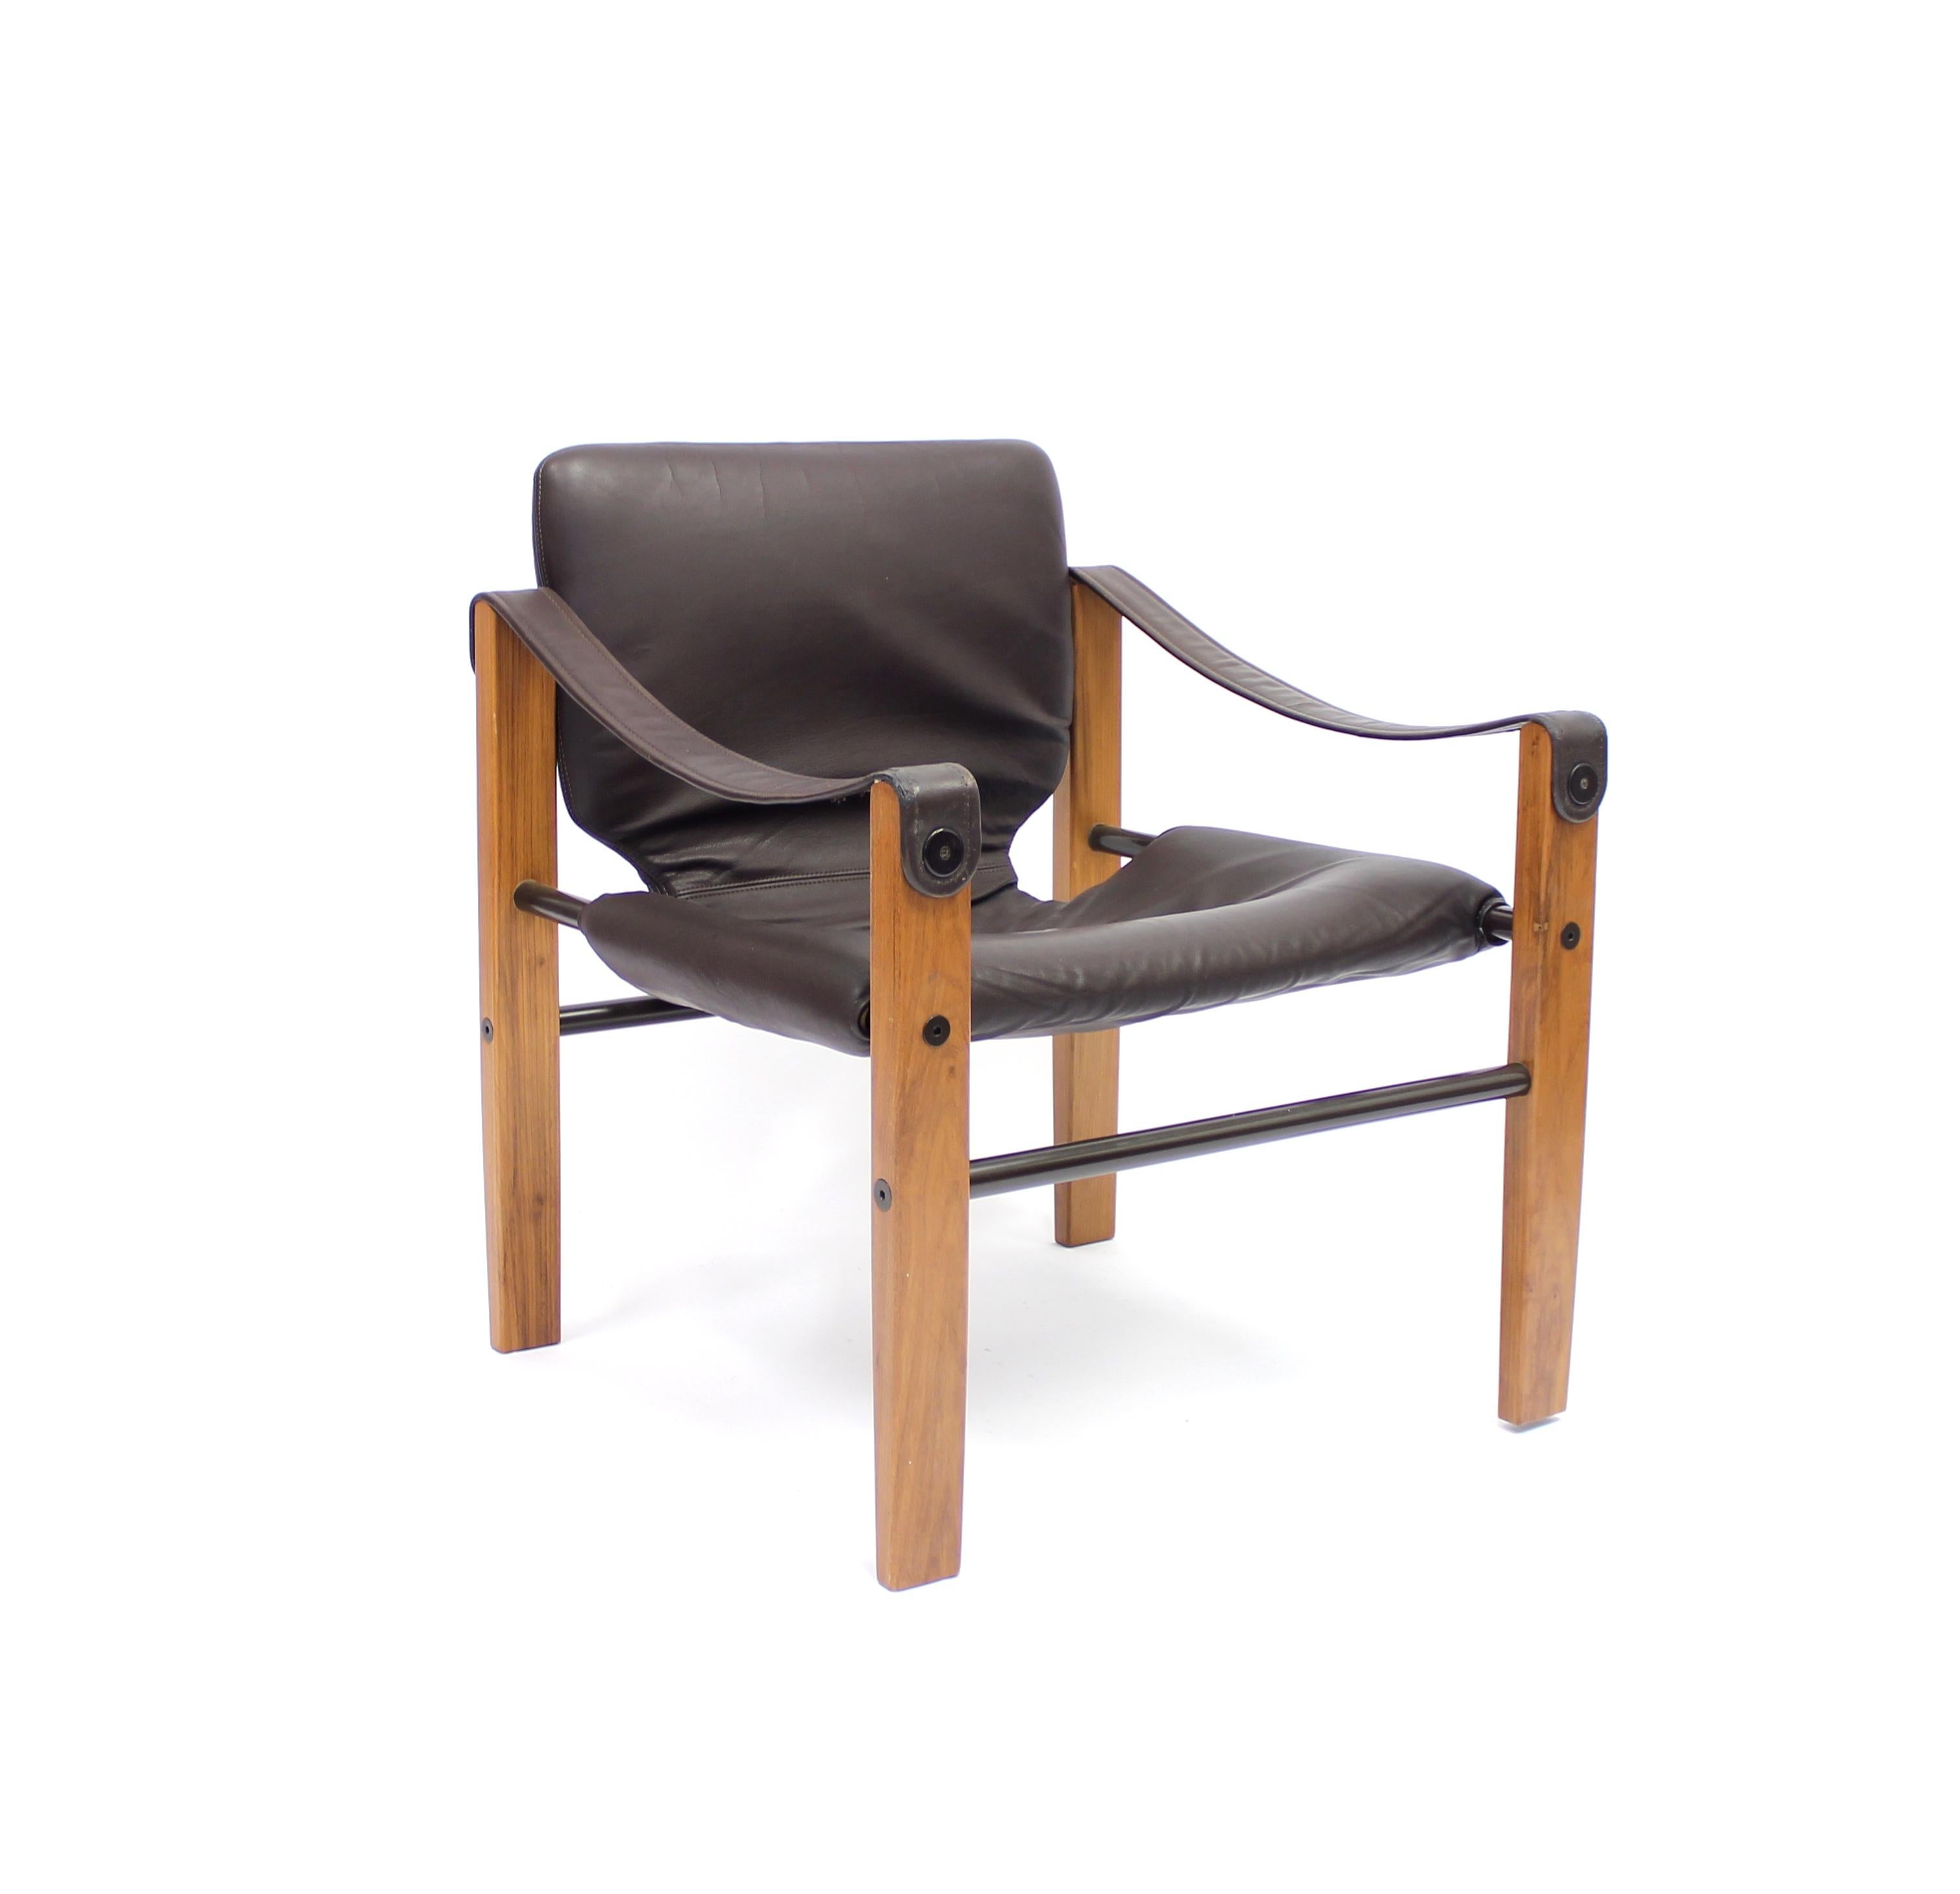 This safari chair, model Chelsea, by Maurice Burke was produced in Brazil in the 1960s and contains its original leather that sits on a teak frame with tubular steel details. Very good condition with light ware consistent with age and use.